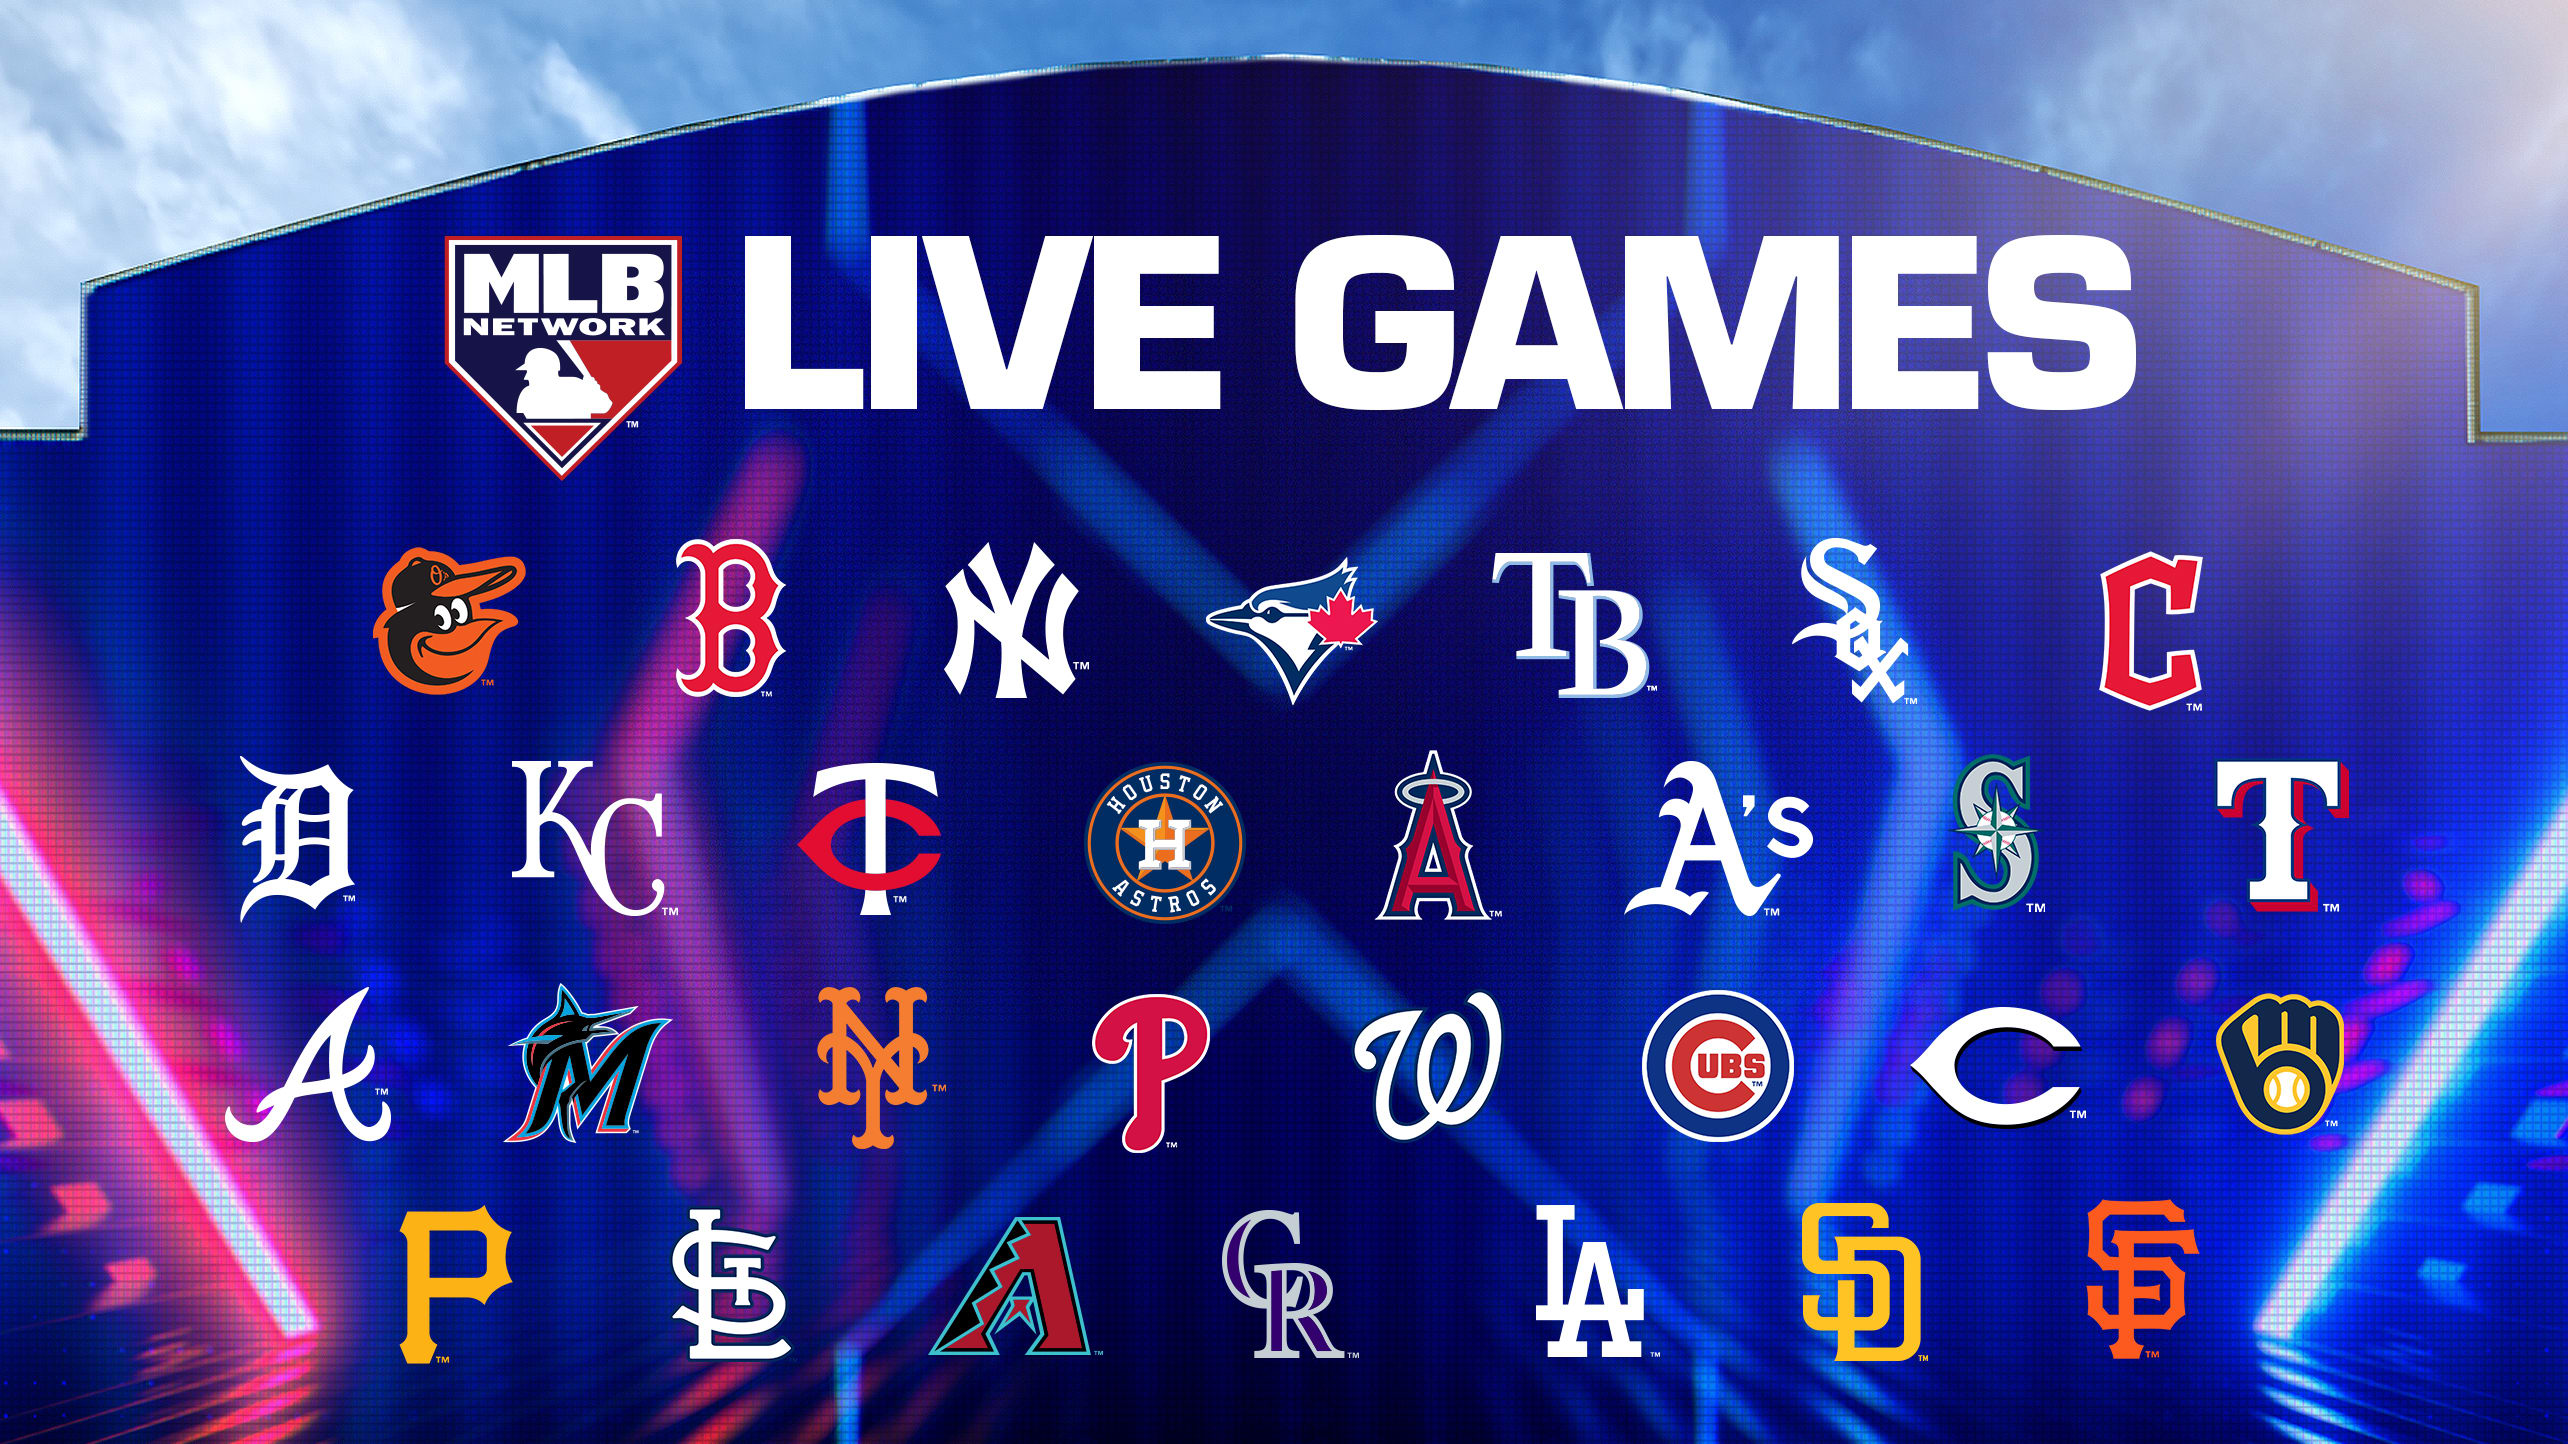 All 30 team logos and the MLB Network logo and the words Live Games